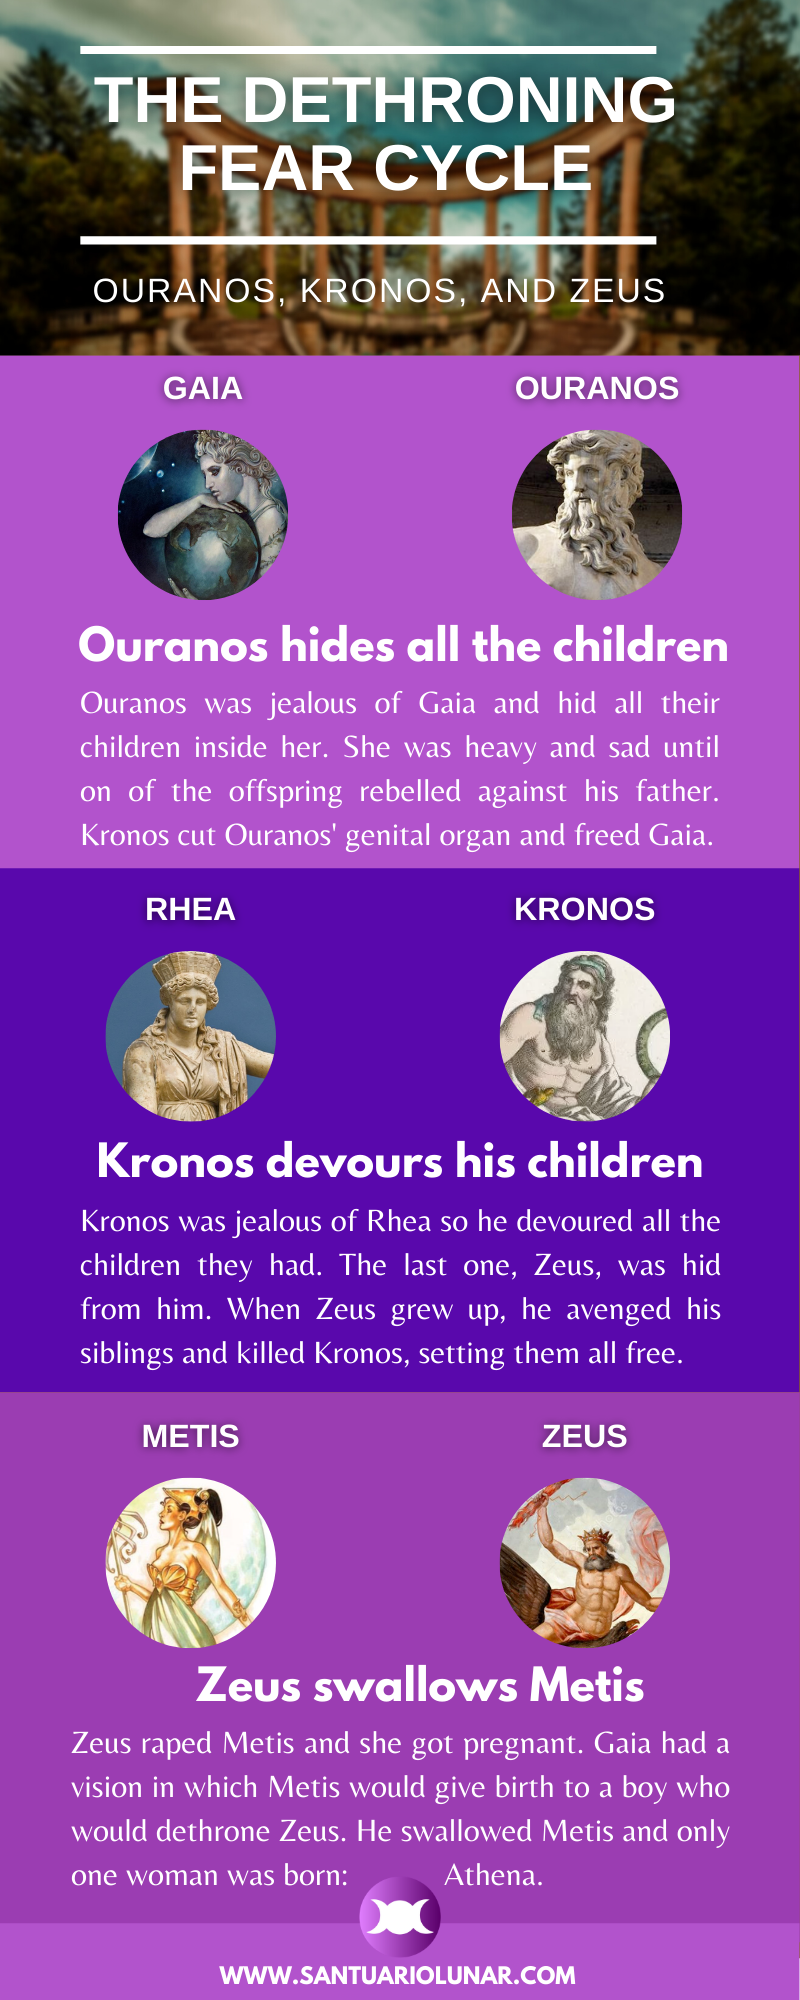 The Dethroning Fear Cycle: Ouranos, Kronos, and Zeus - Infographic